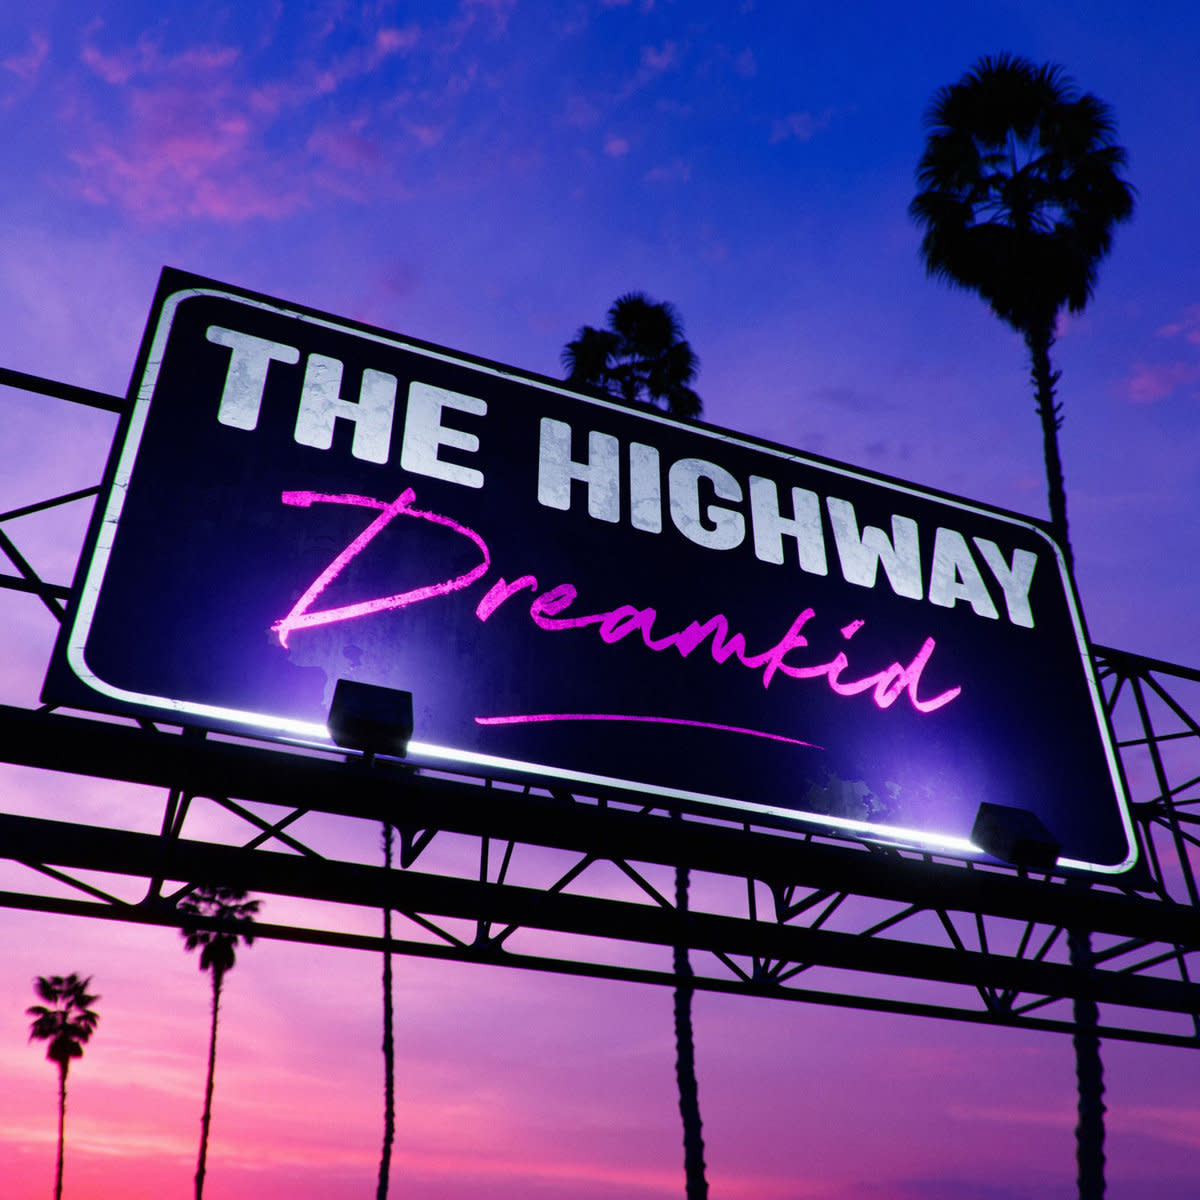 Synth Single Review: “The Highway” by Dreamkid